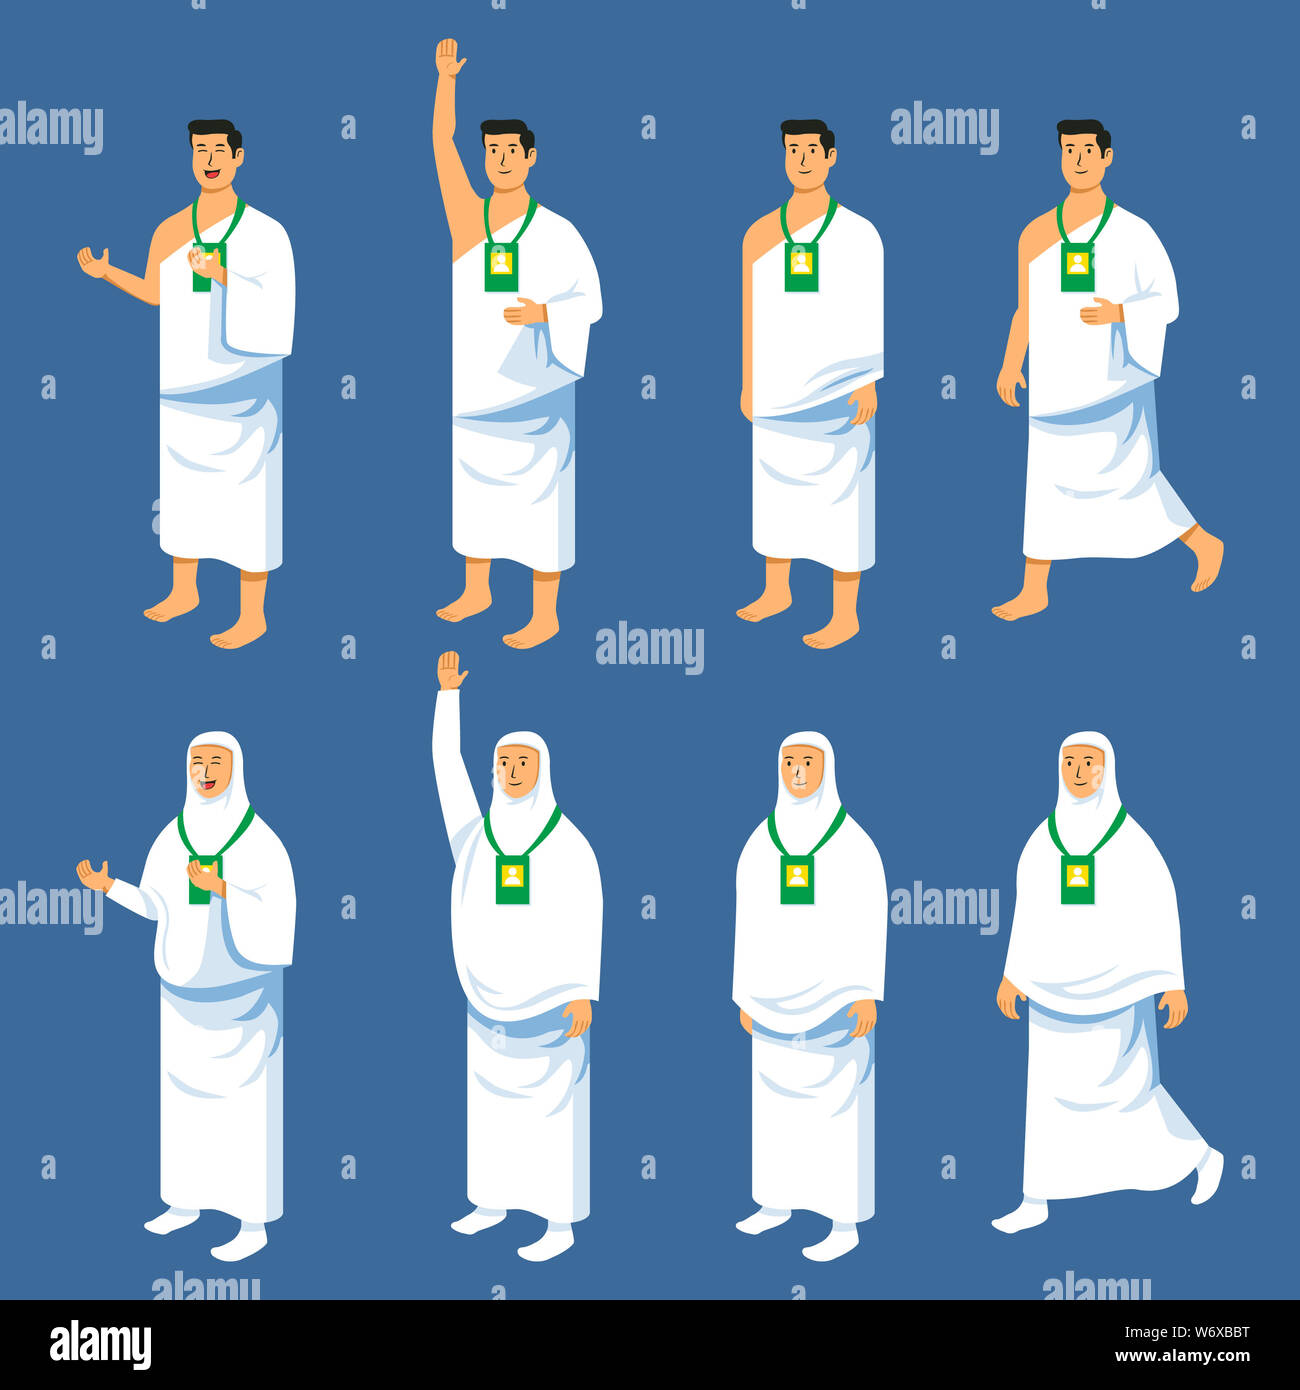 Set couples character of hajj pilgrimage. Suitable for infographic. Stock Photo